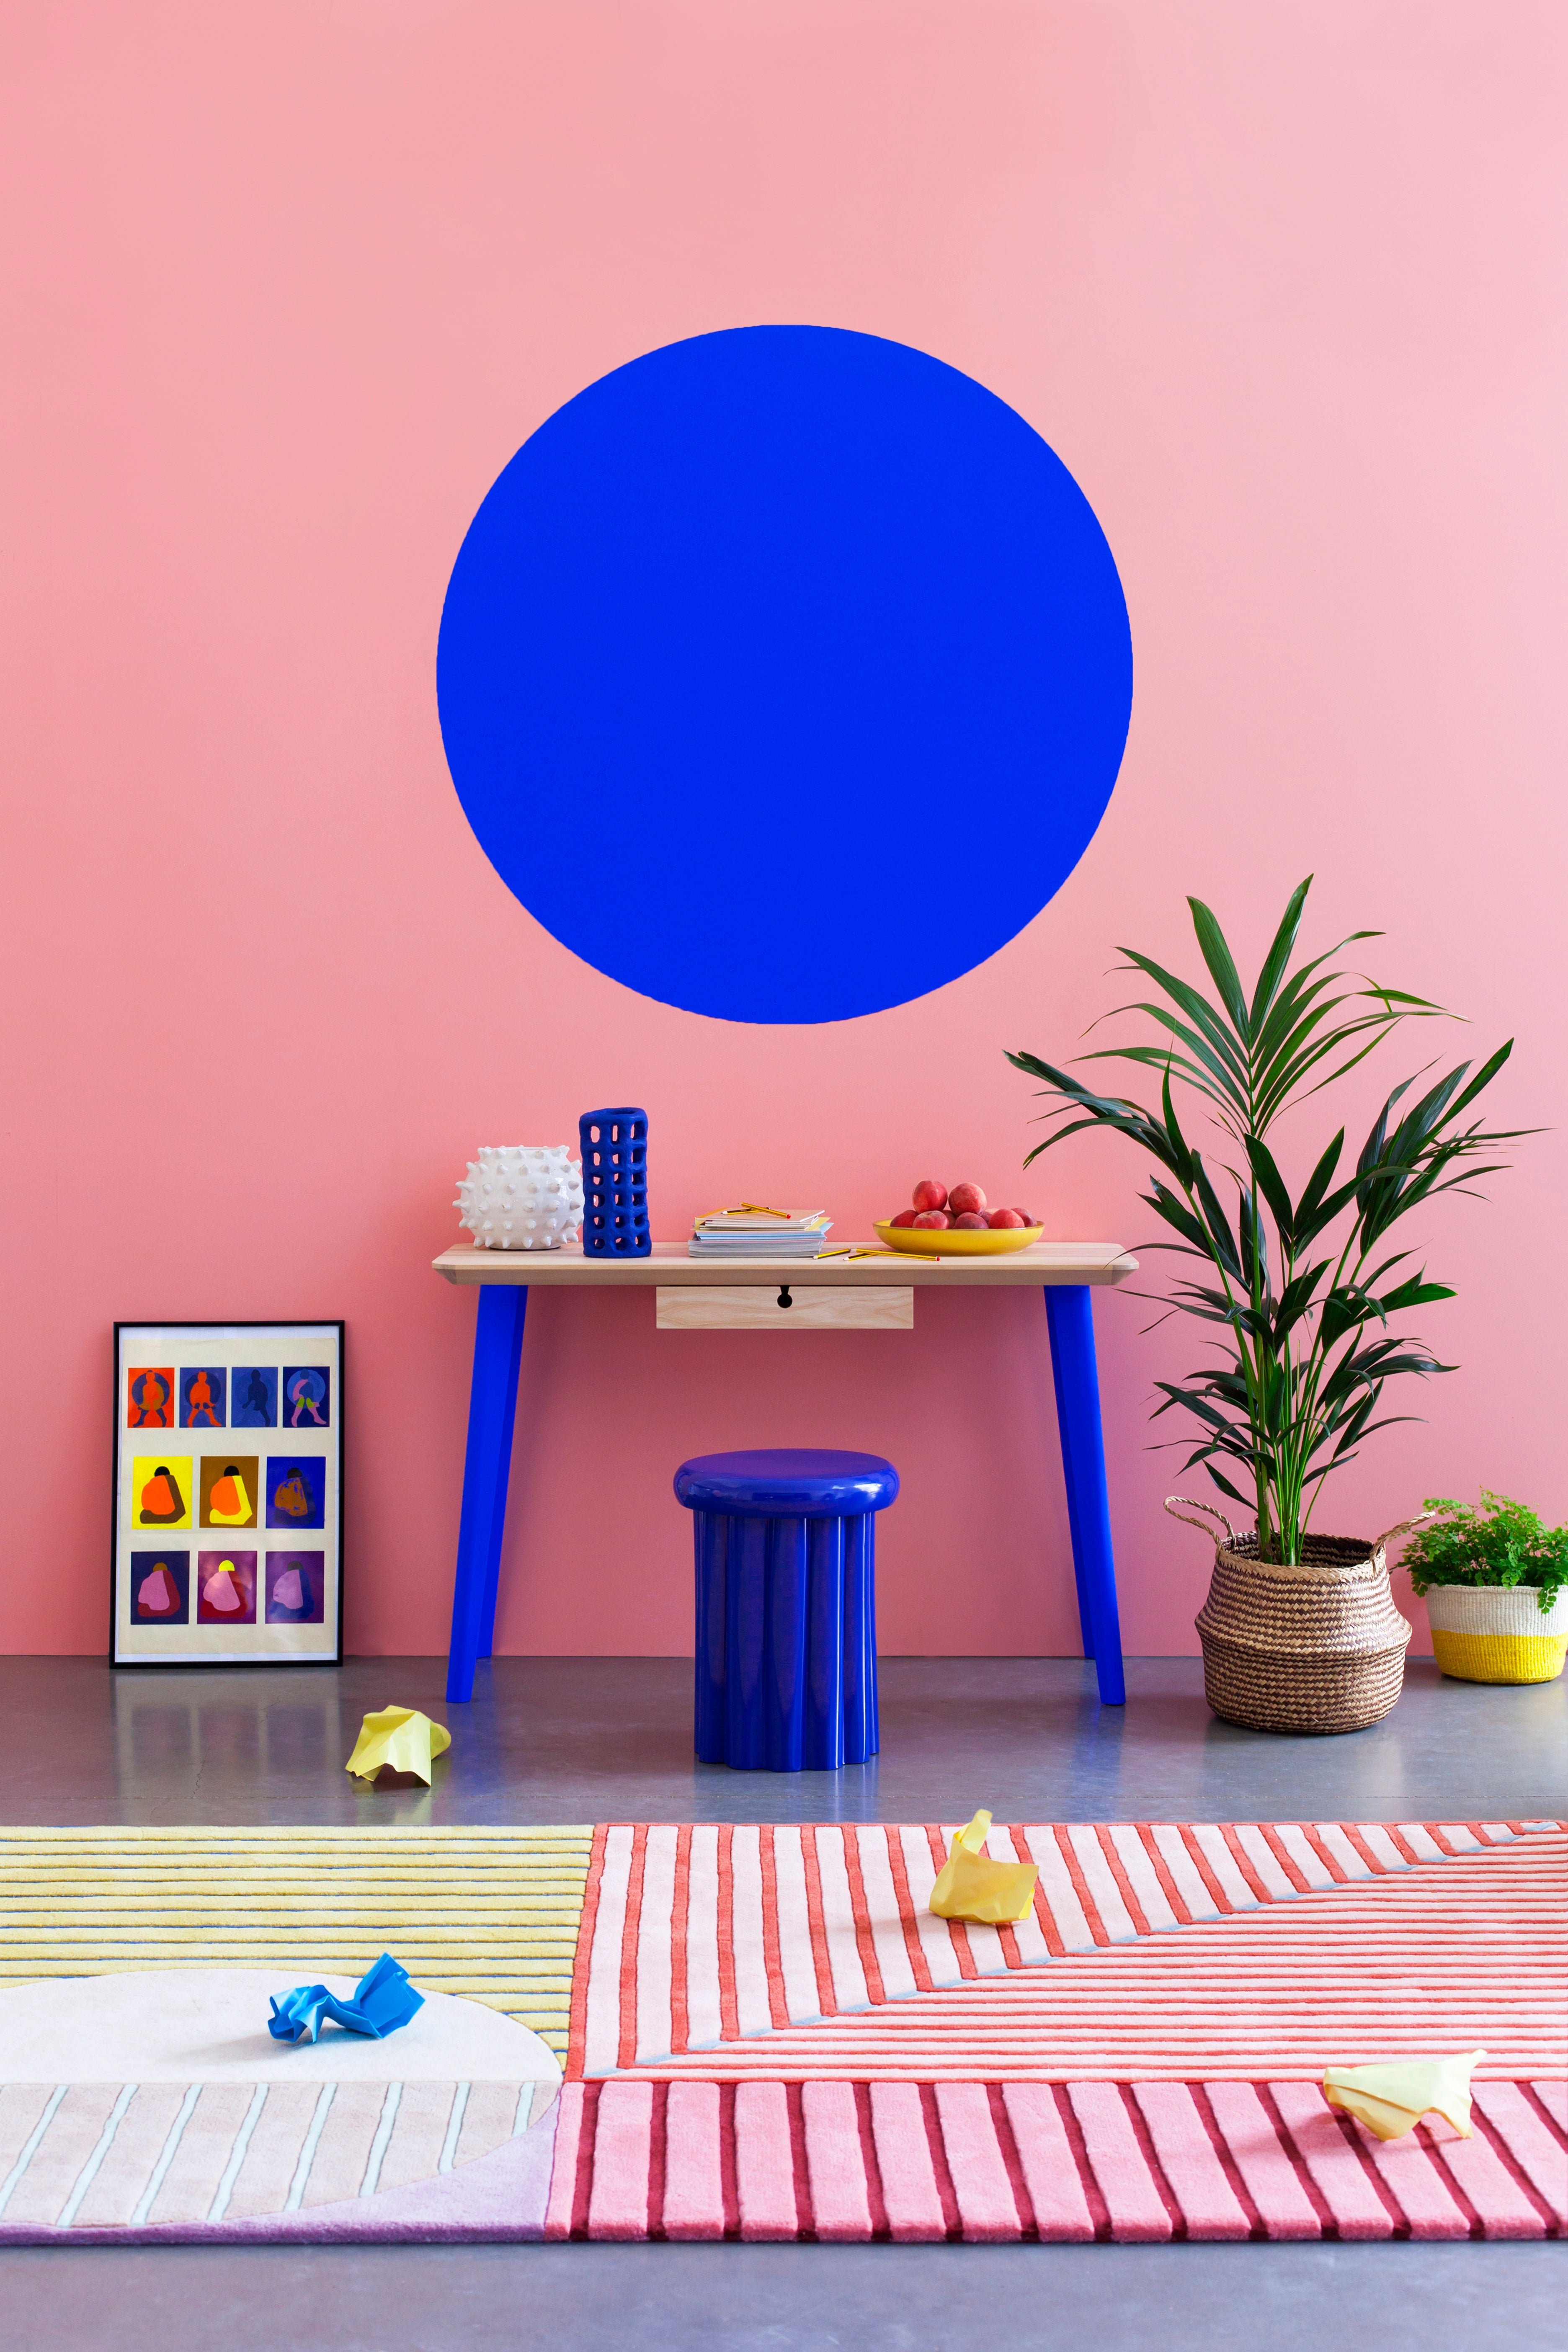 Electric Blue is YesColour’s best selling shade as people move away from bland interiors